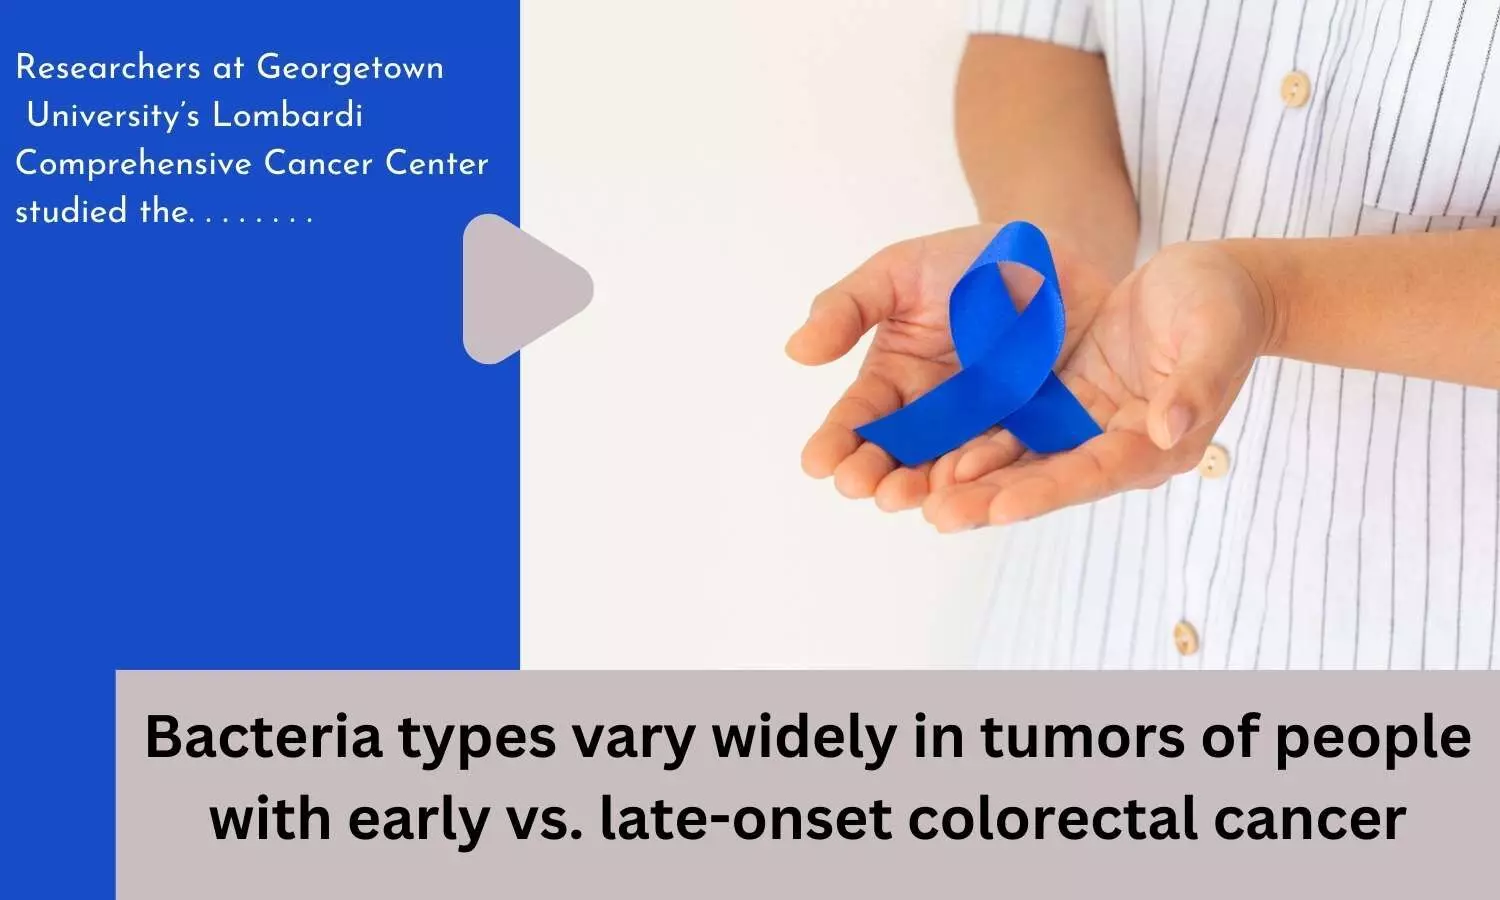 Bacteria types vary widely in tumors of people with early vs. late-onset colorectal cancer